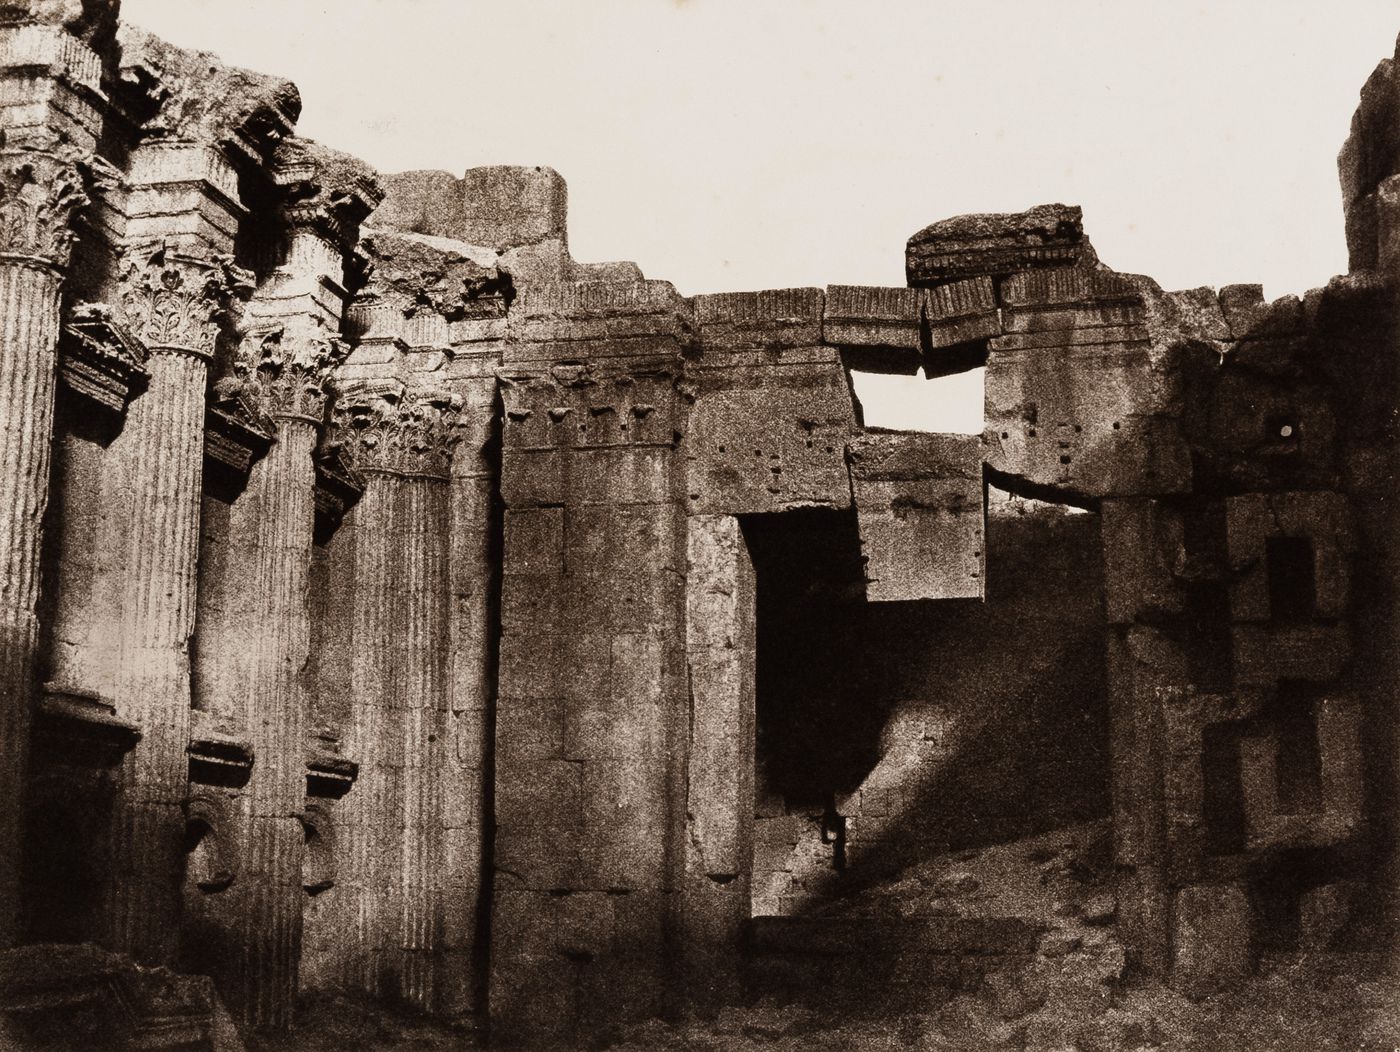 Interior view of the ruins of the Temple to Jupiter, Baalbek, Ottoman Empire (now in Lebanon)